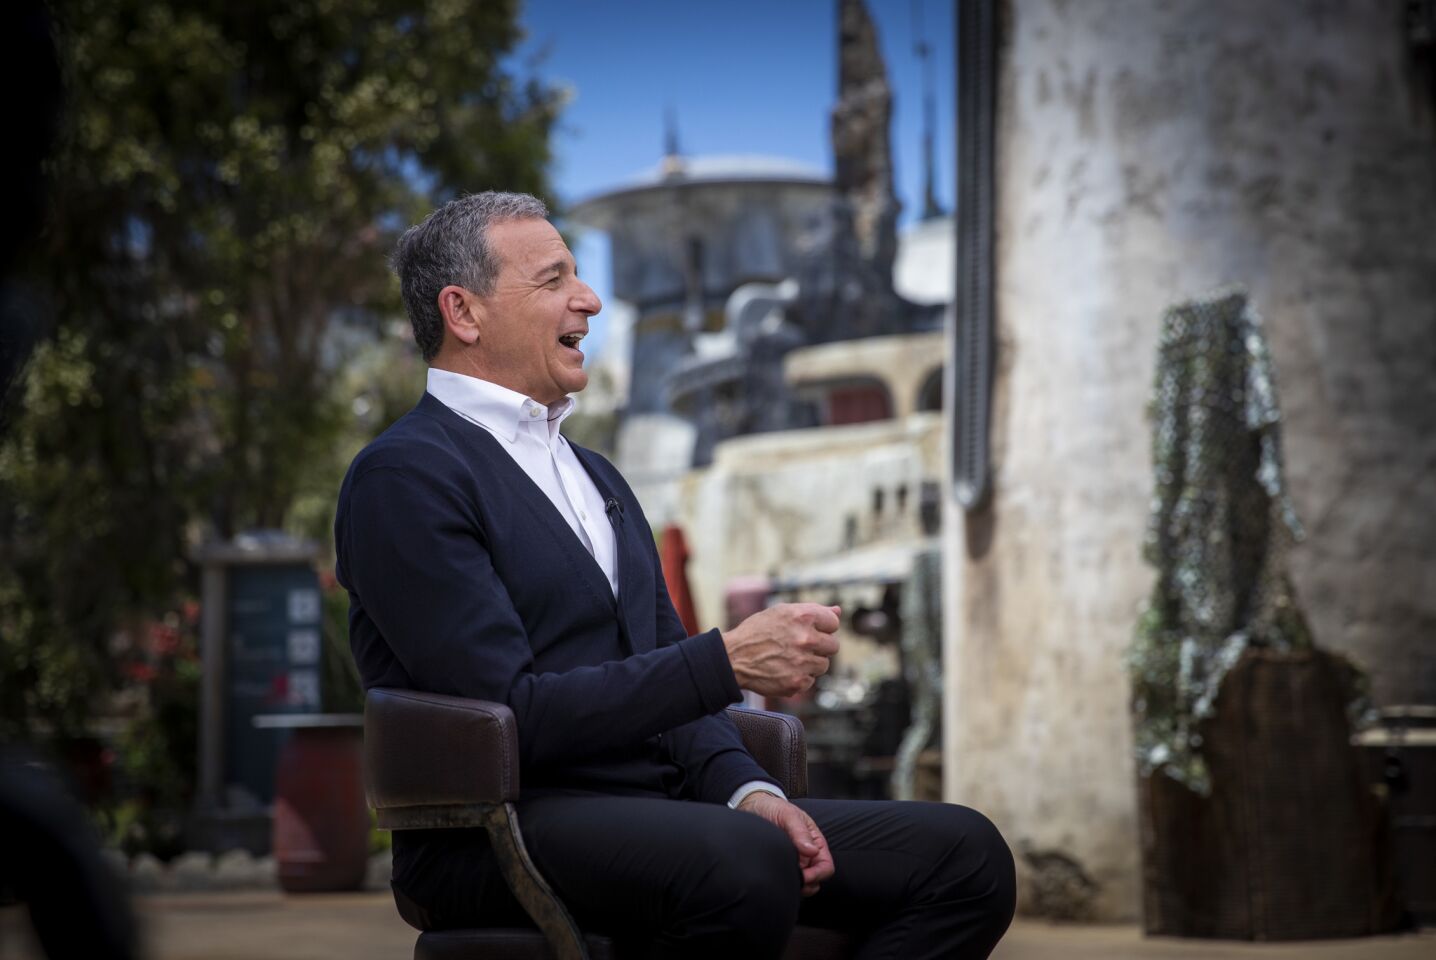 Bob Iger, chief executive of The Walt Disney Company, during the Star Wars: Galaxy's Edge media preview event at Disneyland.